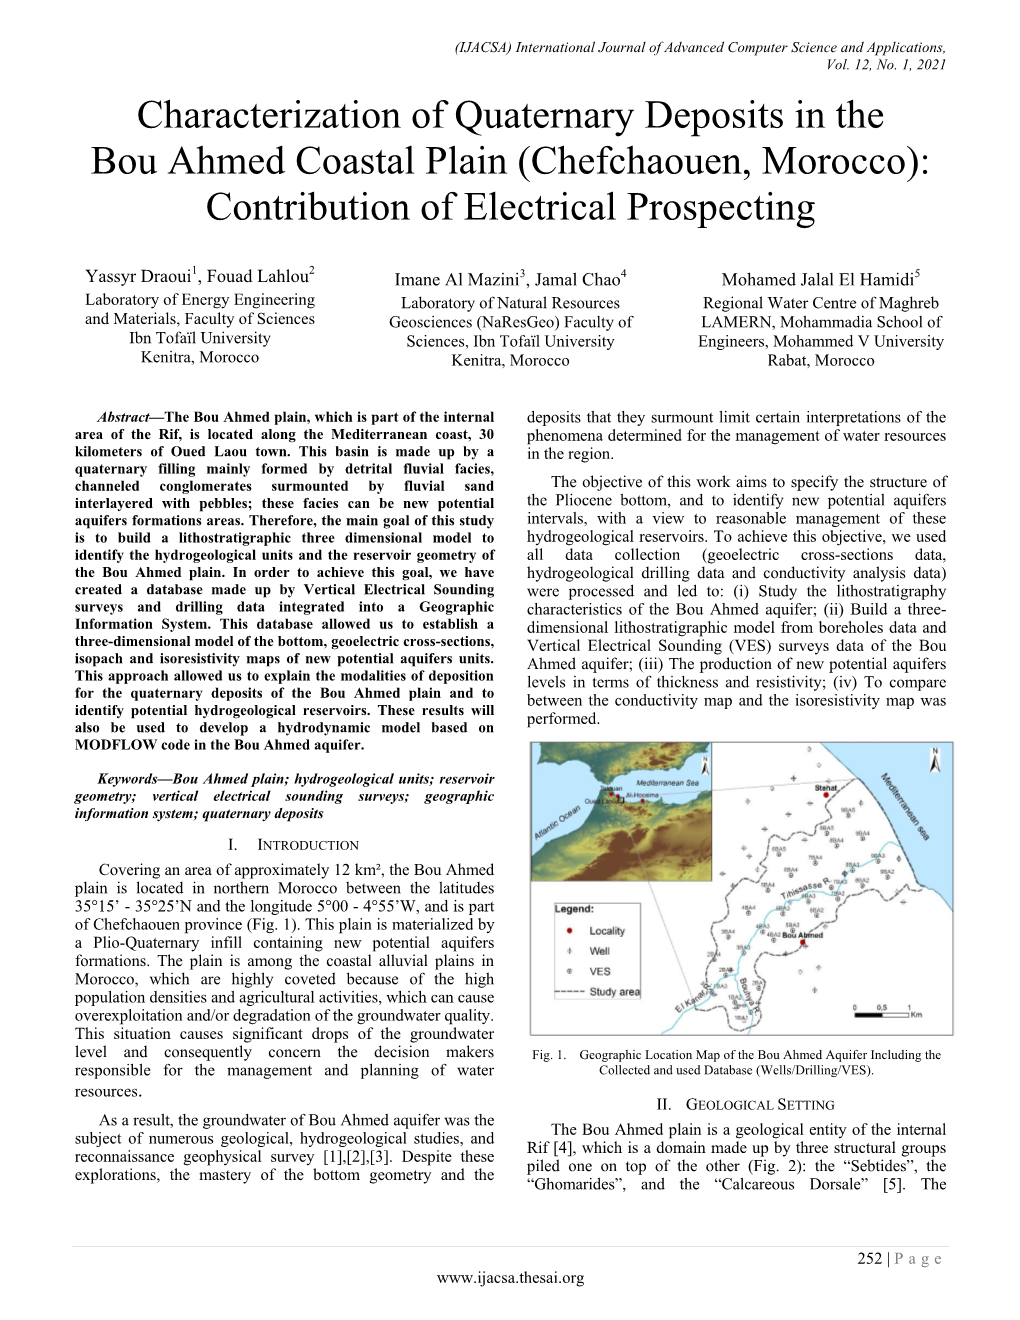 Characterization of Quaternary Deposits in the Bou Ahmed Coastal Plain (Chefchaouen, Morocco): Contribution of Electrical Prospecting